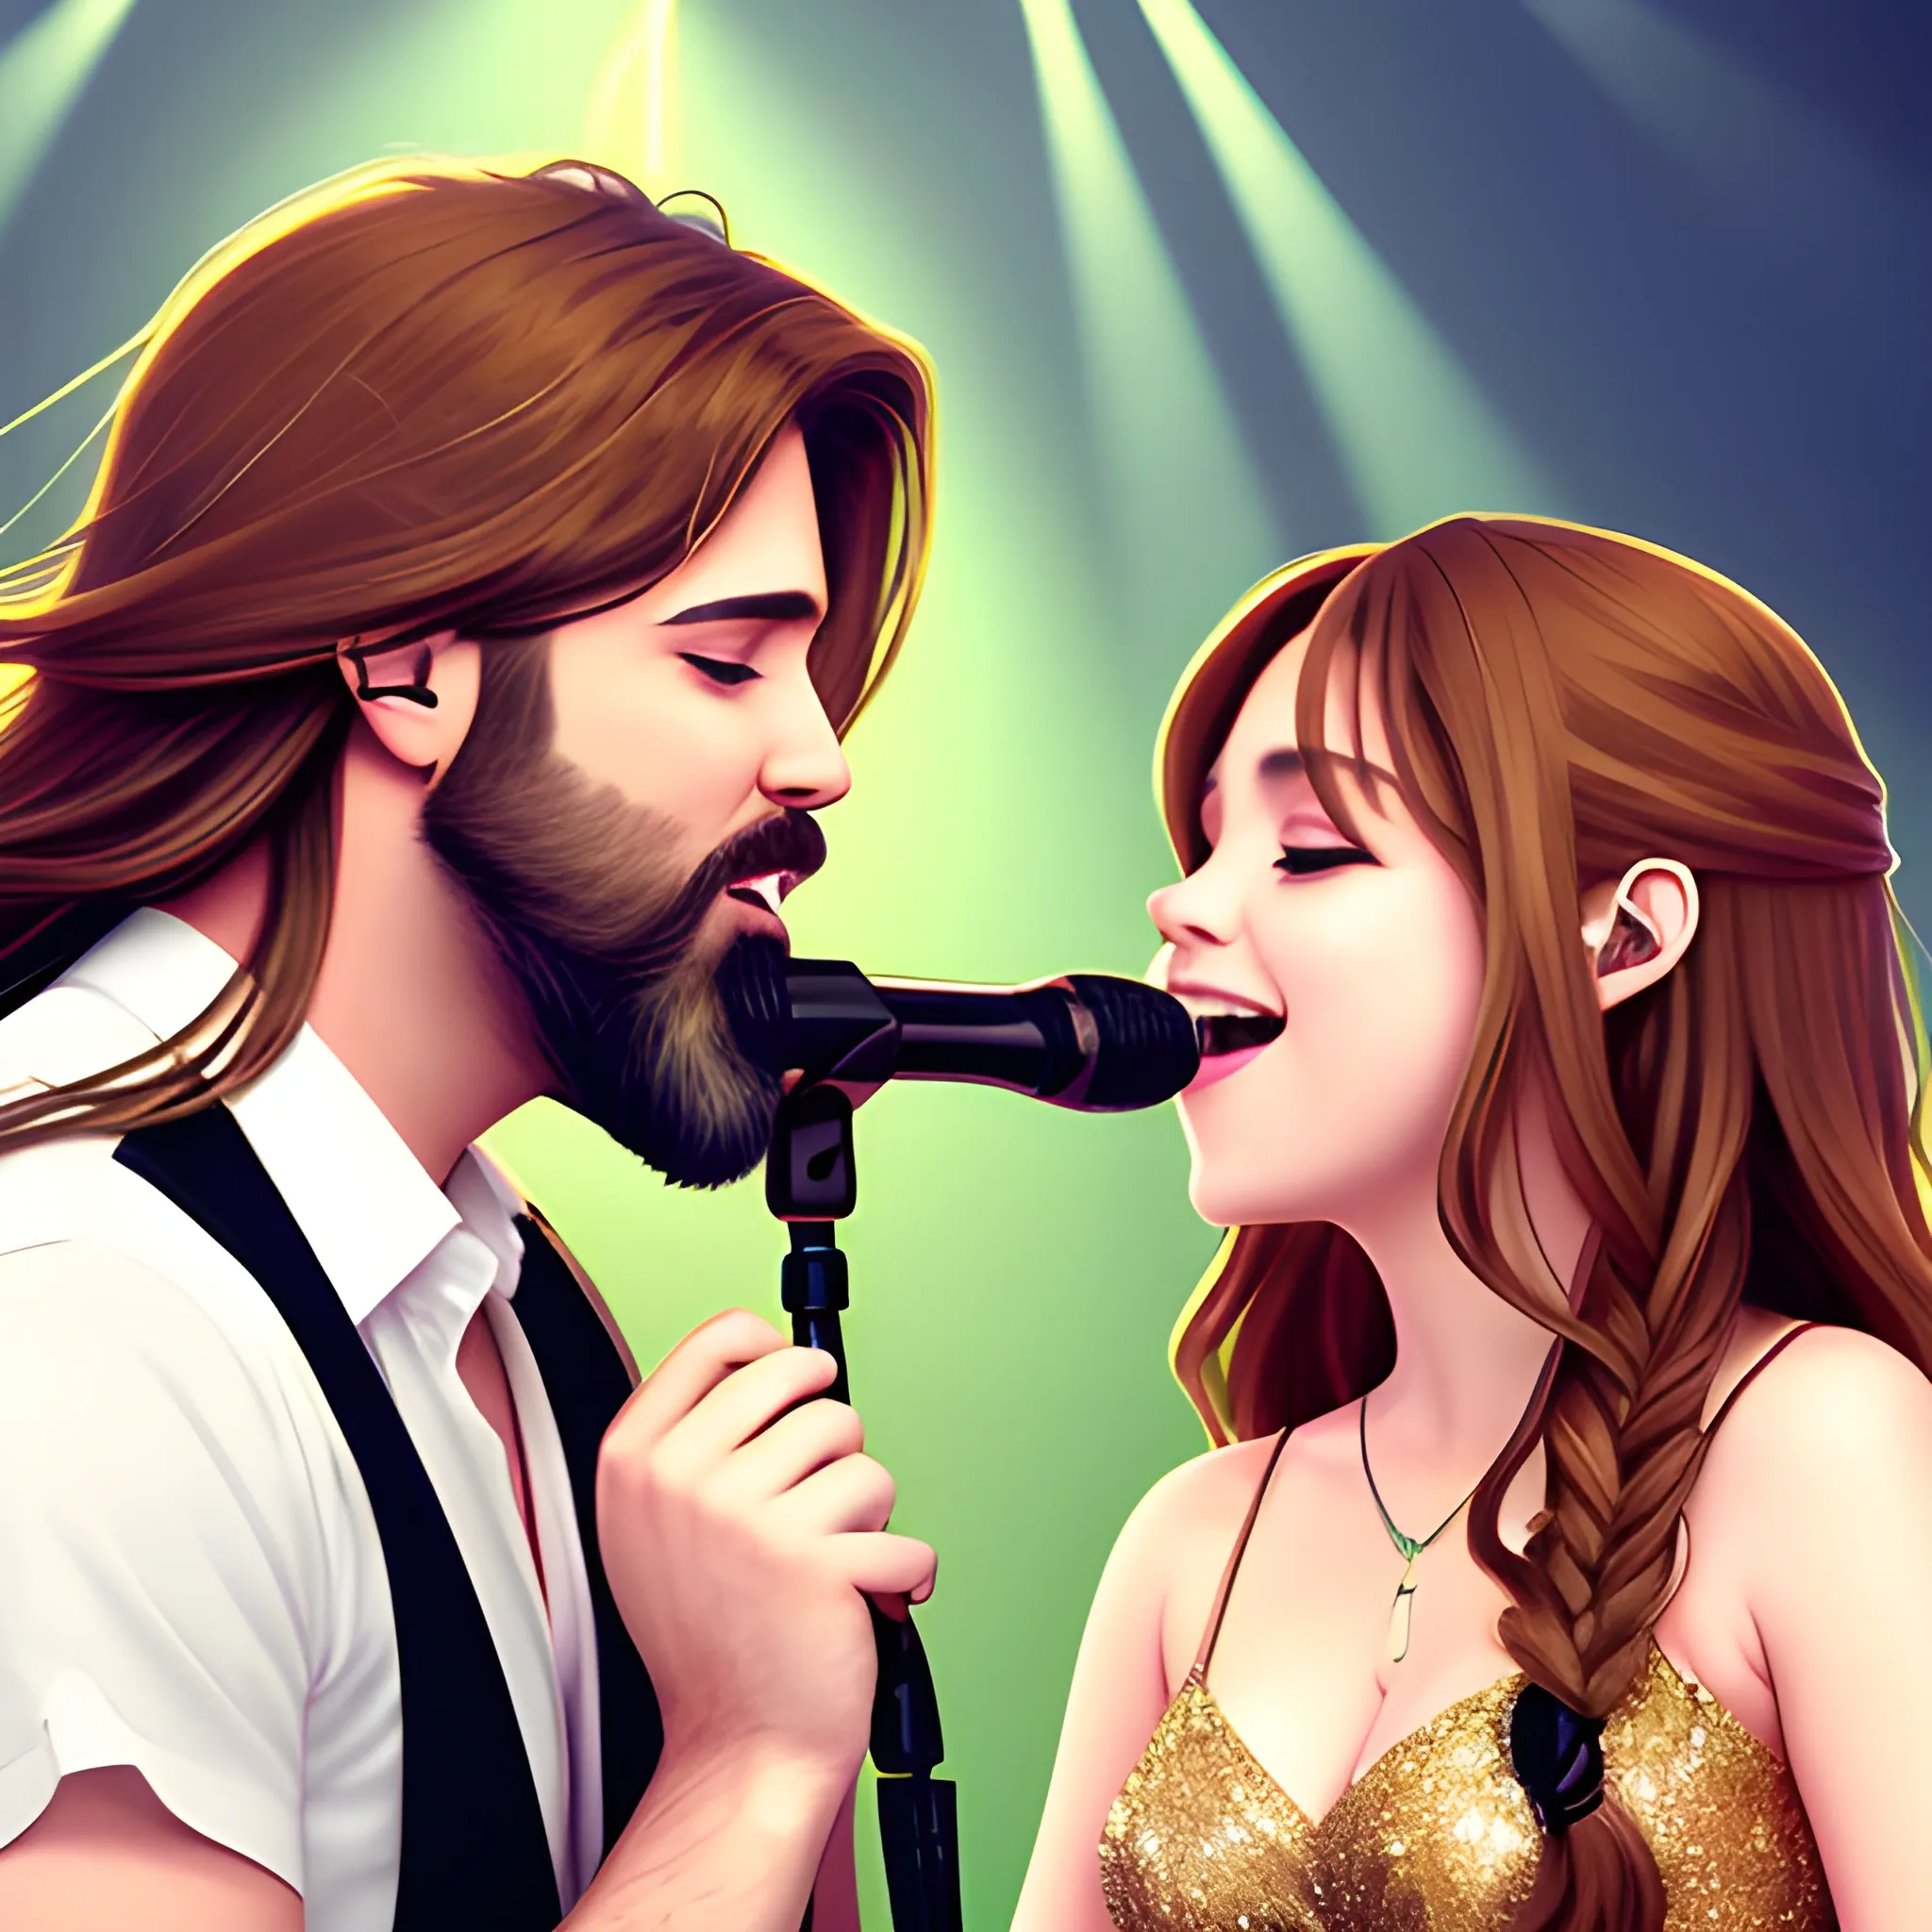 create an image where a male singer is on stage, the man has a beard and brown hair, a light shines on a woman in the audience who looks at the singer in love, the woman has straight brown and long hair, sweets can be seen falling from heaven, anime style.